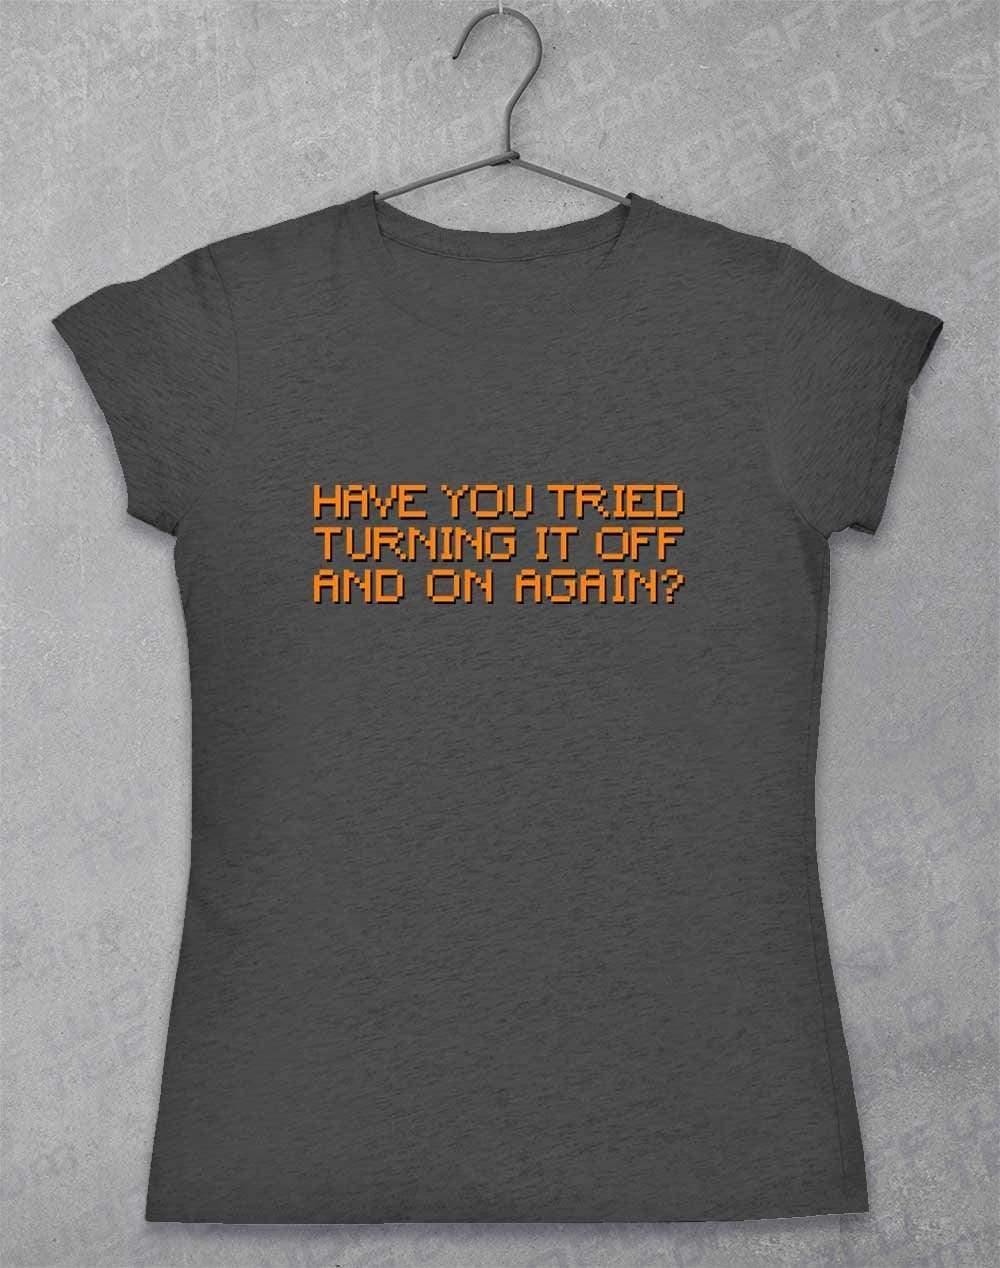 Off and On Again Women's T-Shirt 8-10 / Dark Heather  - Off World Tees